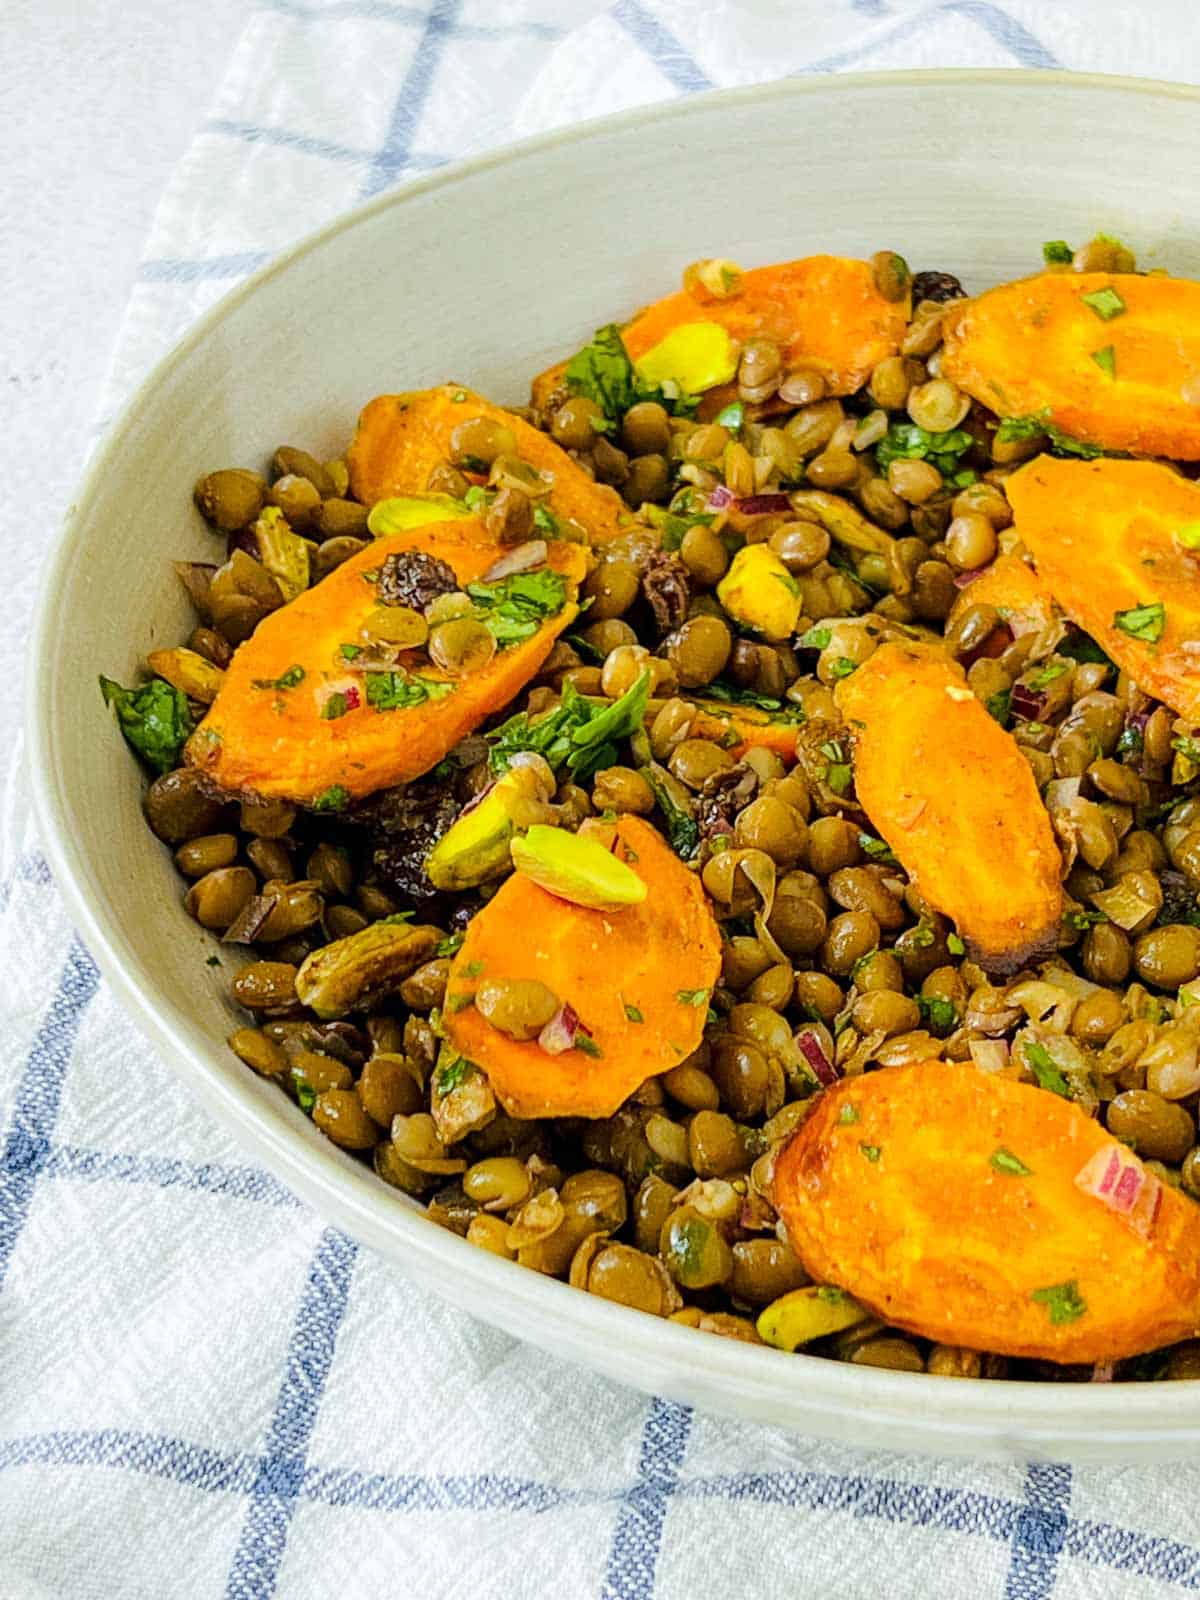 Lentil carrot salad topped with pistachio and cilantro.